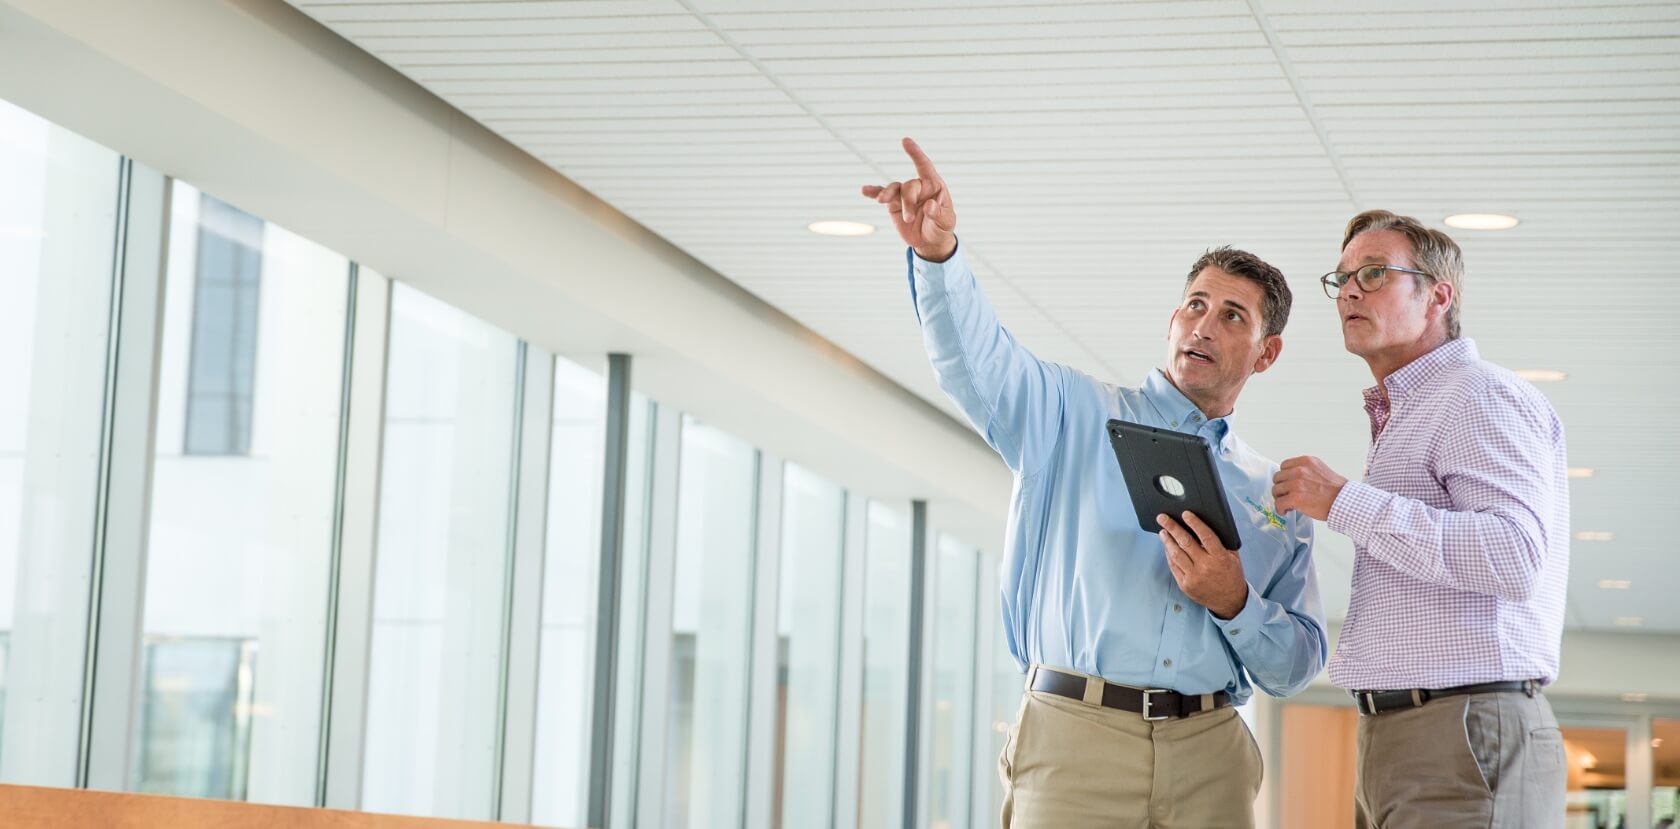 A servicemaster consultant pointing to something off camera with a customer looking in the same direction to where he's pointing